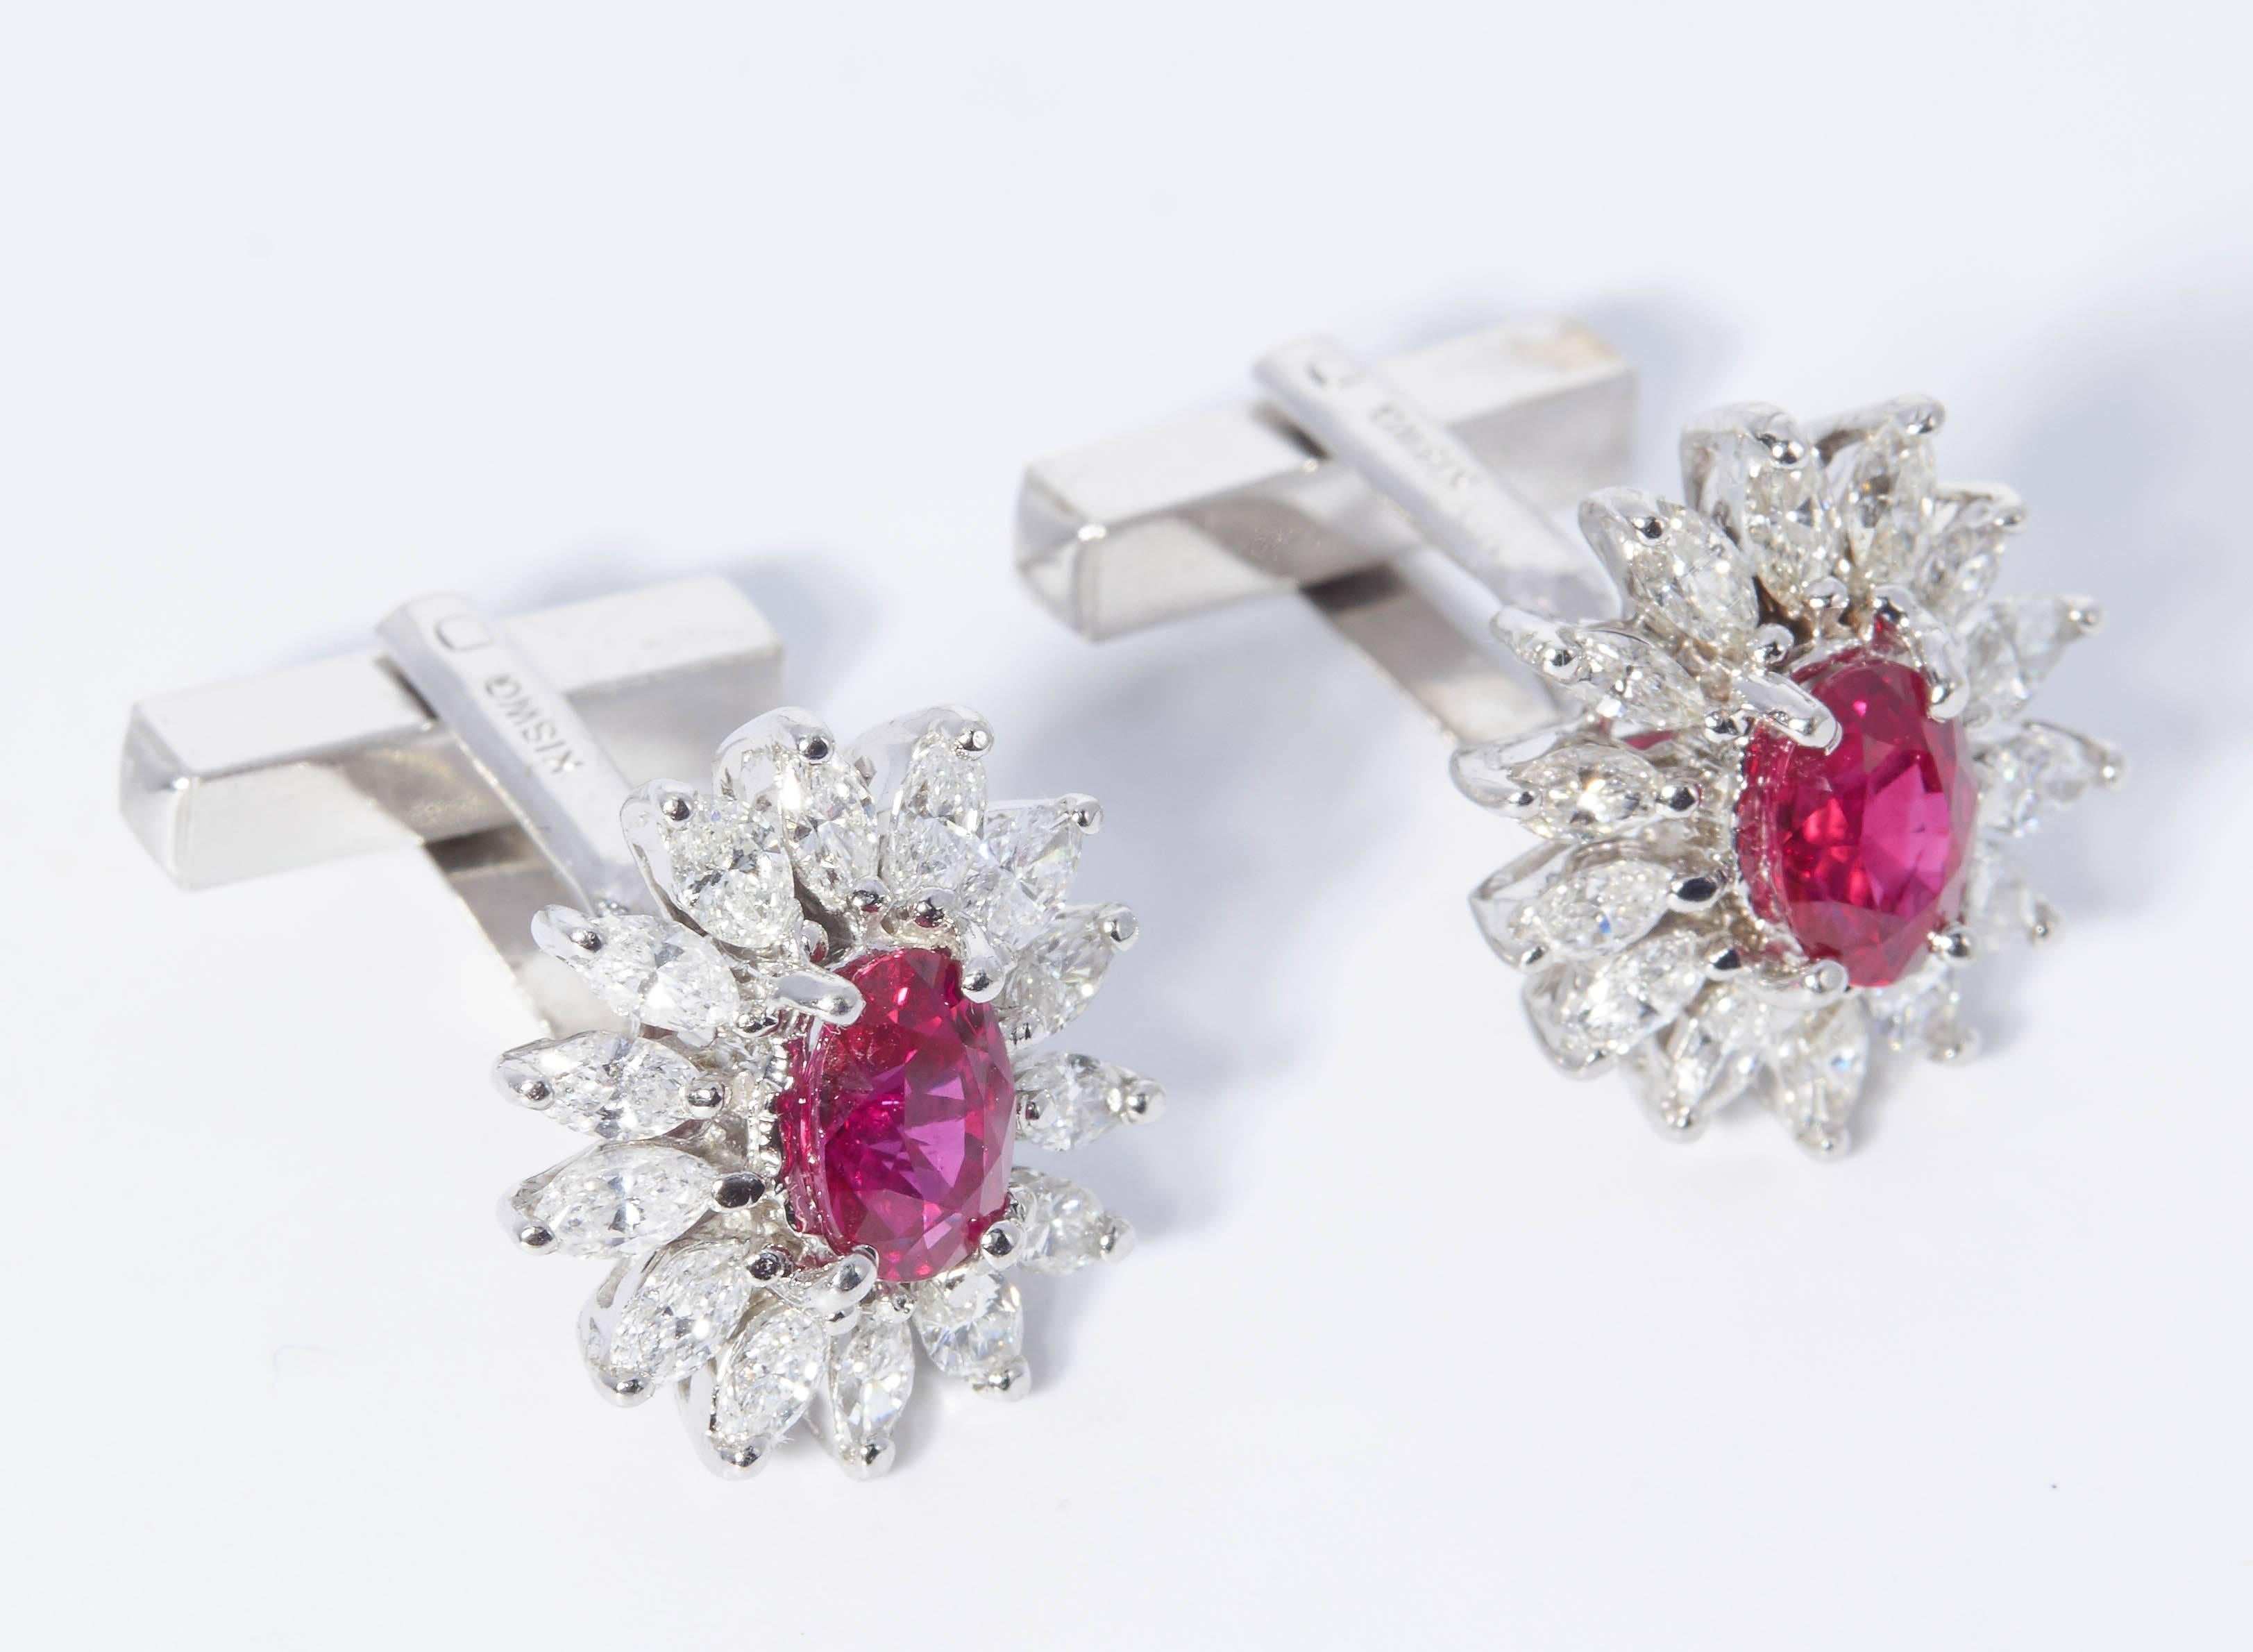 18 K White Gold
6.3 g.
28 Diamonds 2 Cts Total weight
2 Ruby 1 Carats Total weight 